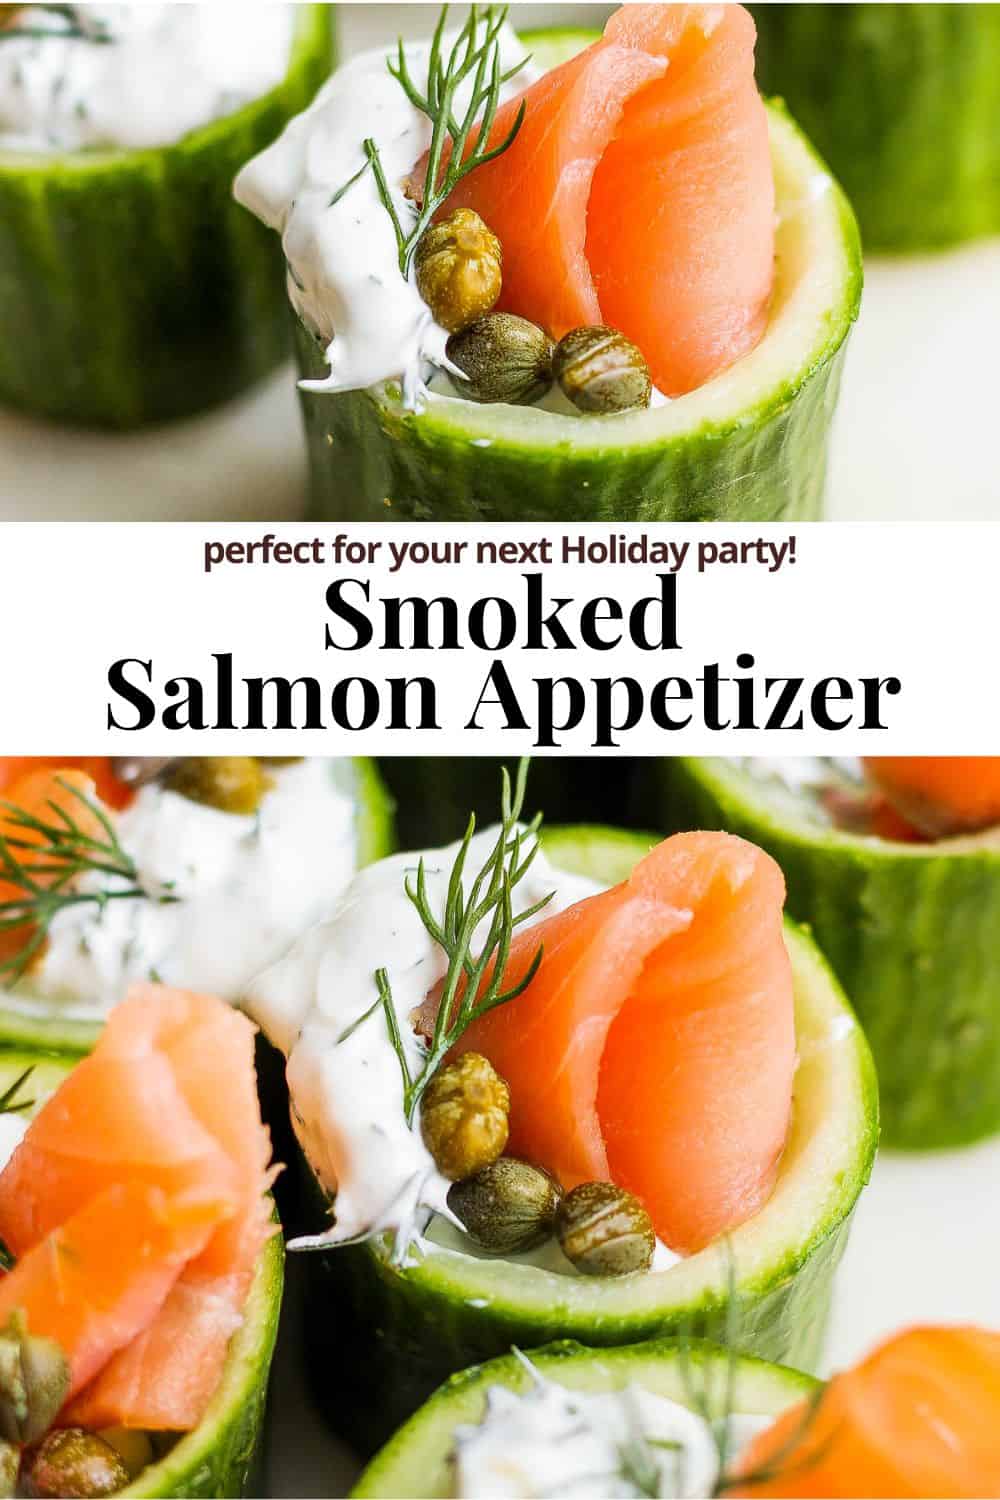 Pinterest image showing cucumber cups with the title "smoked salmon appetizer. perfect for your next holiday party".